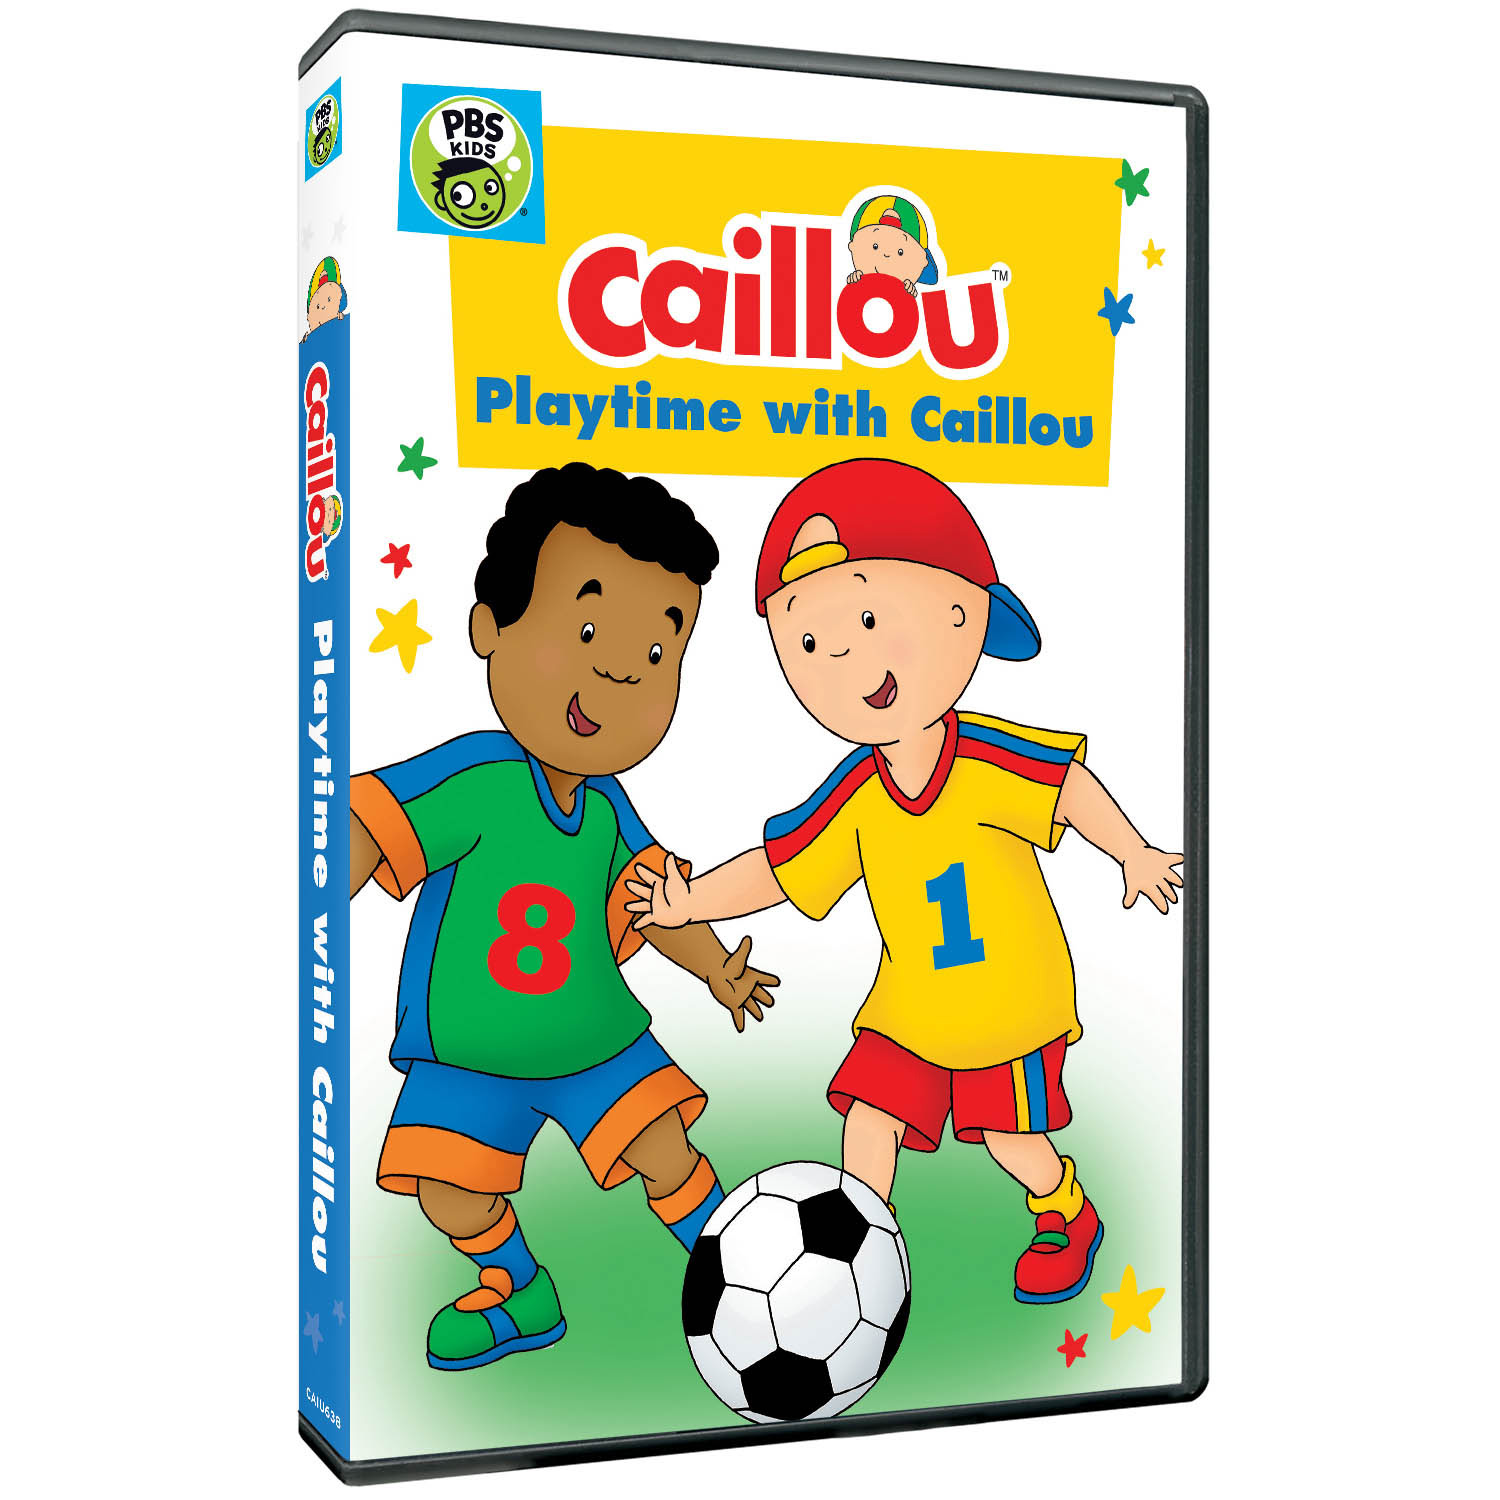 Caillou: Playtime with Caillou DVD | Shop.PBS.org